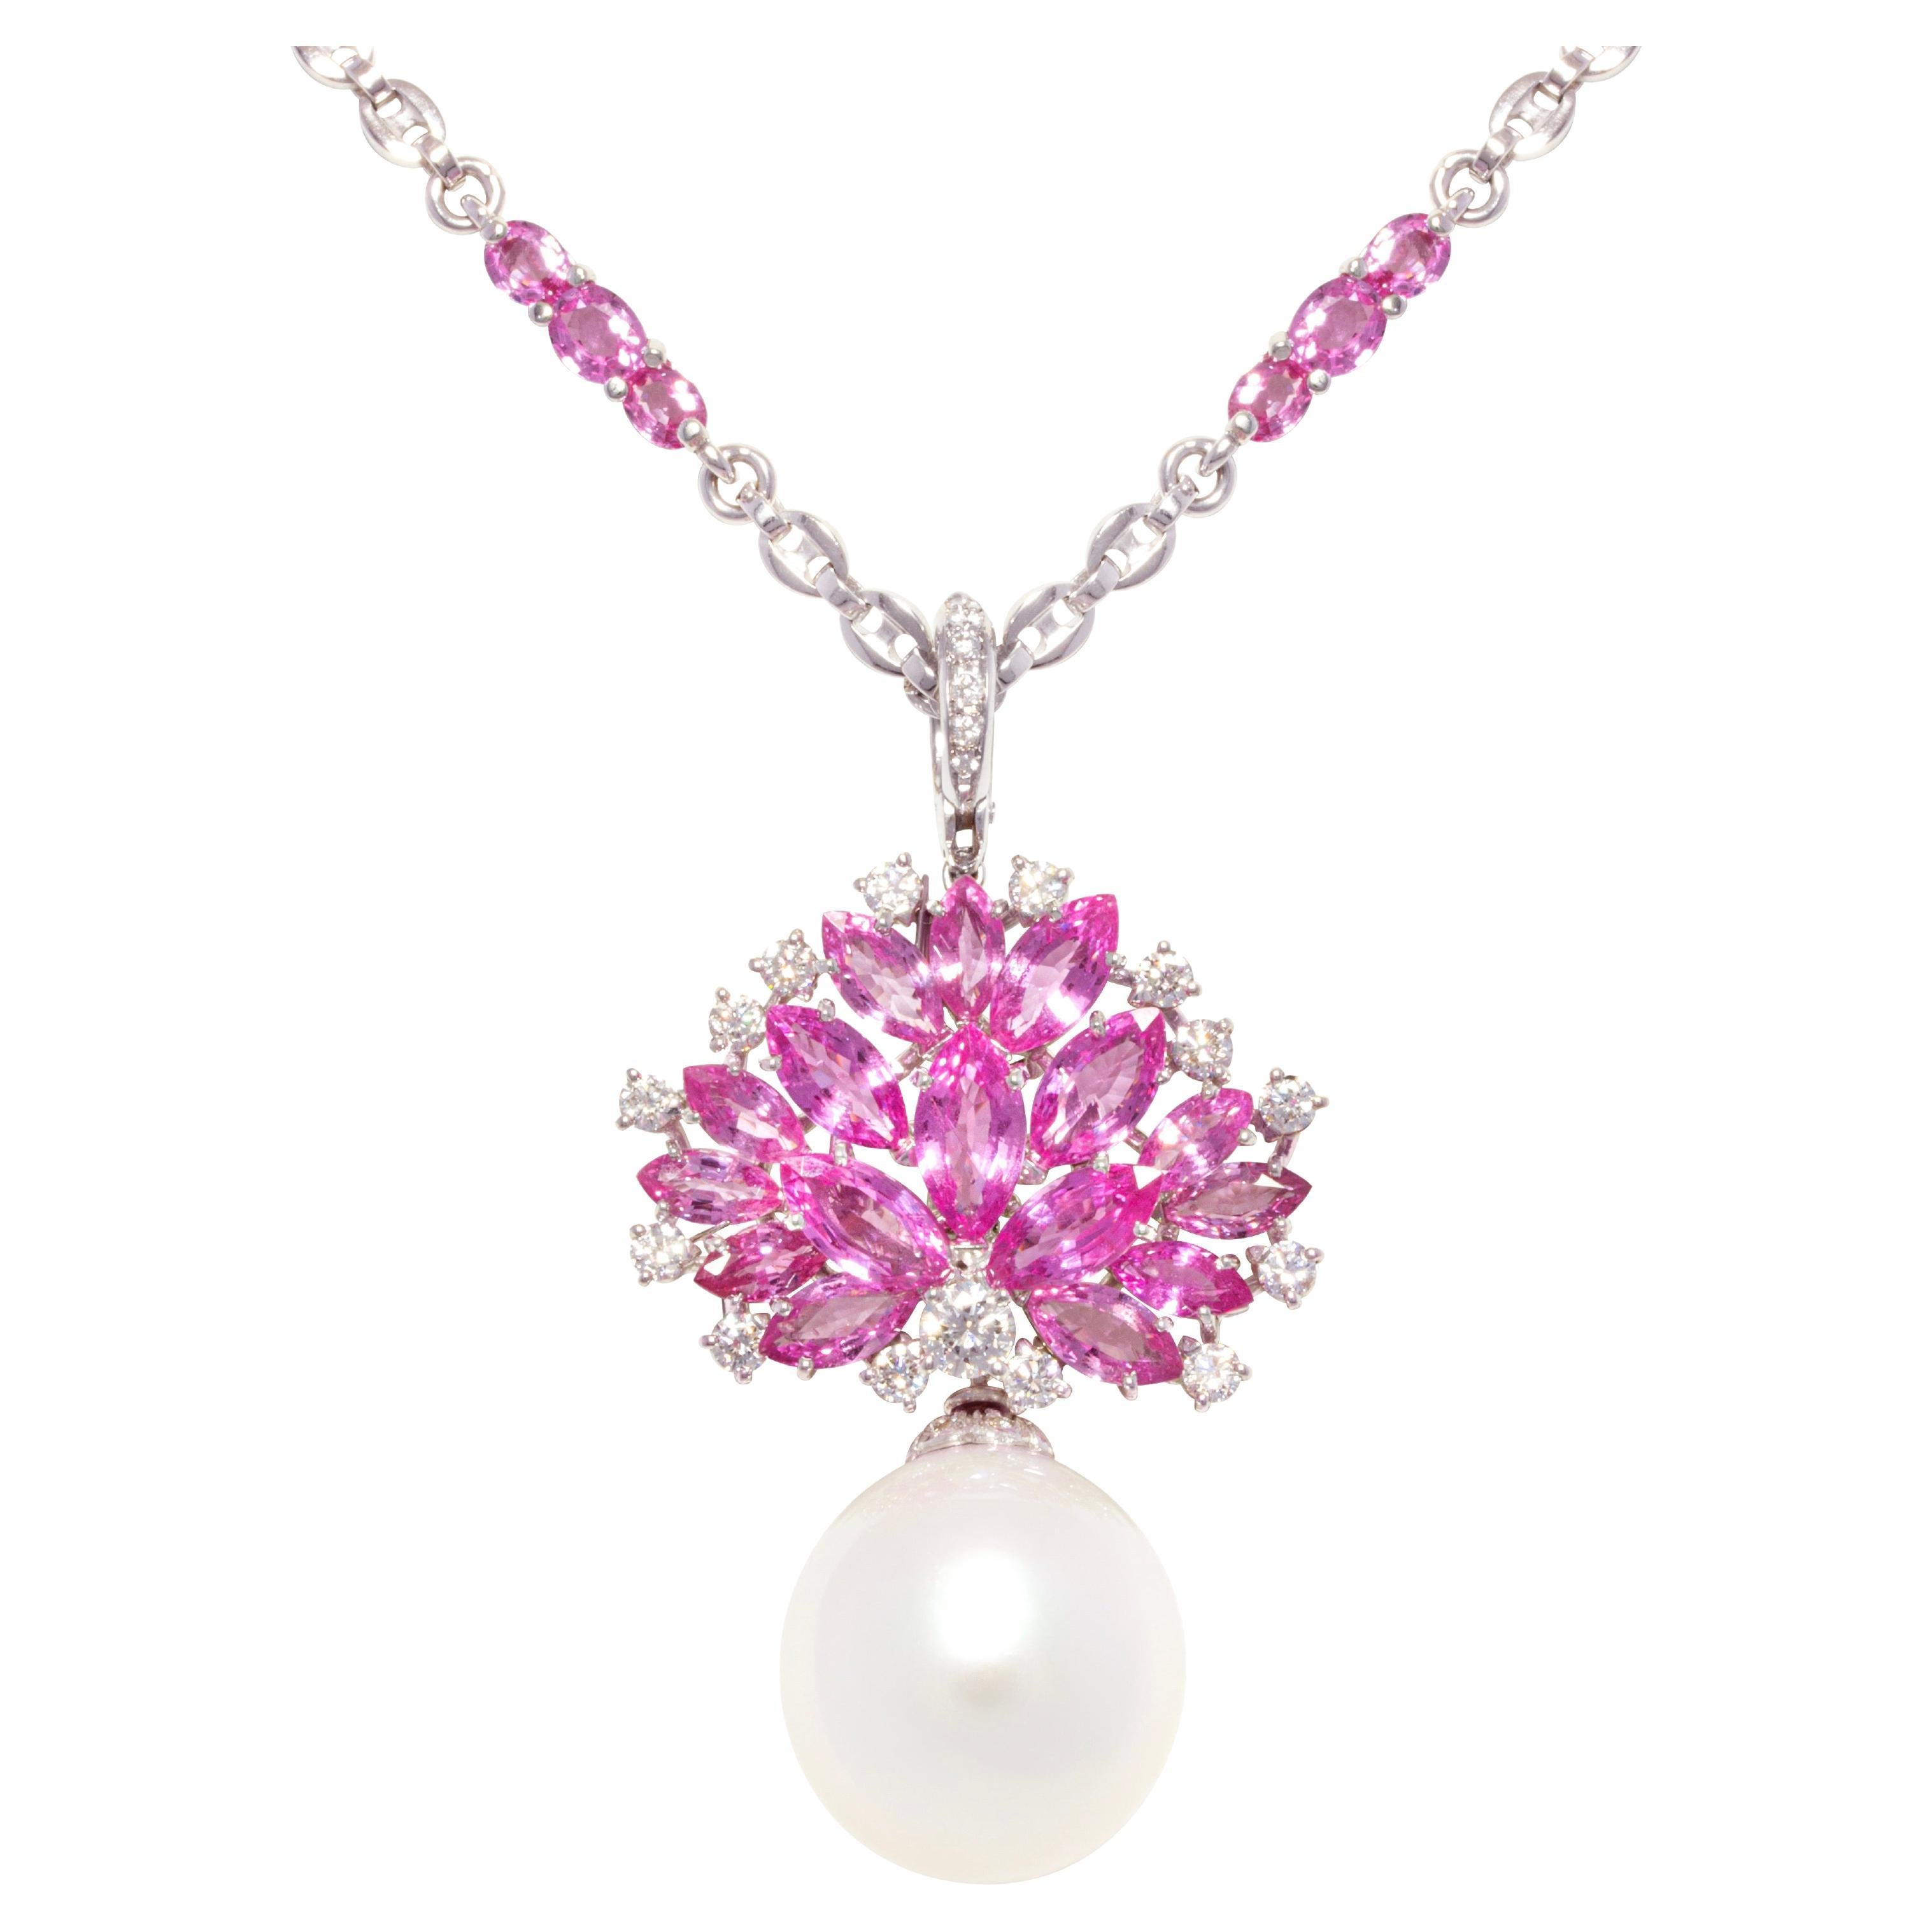 Ella Gafter Pearl Pink Sapphire Diamond Necklace